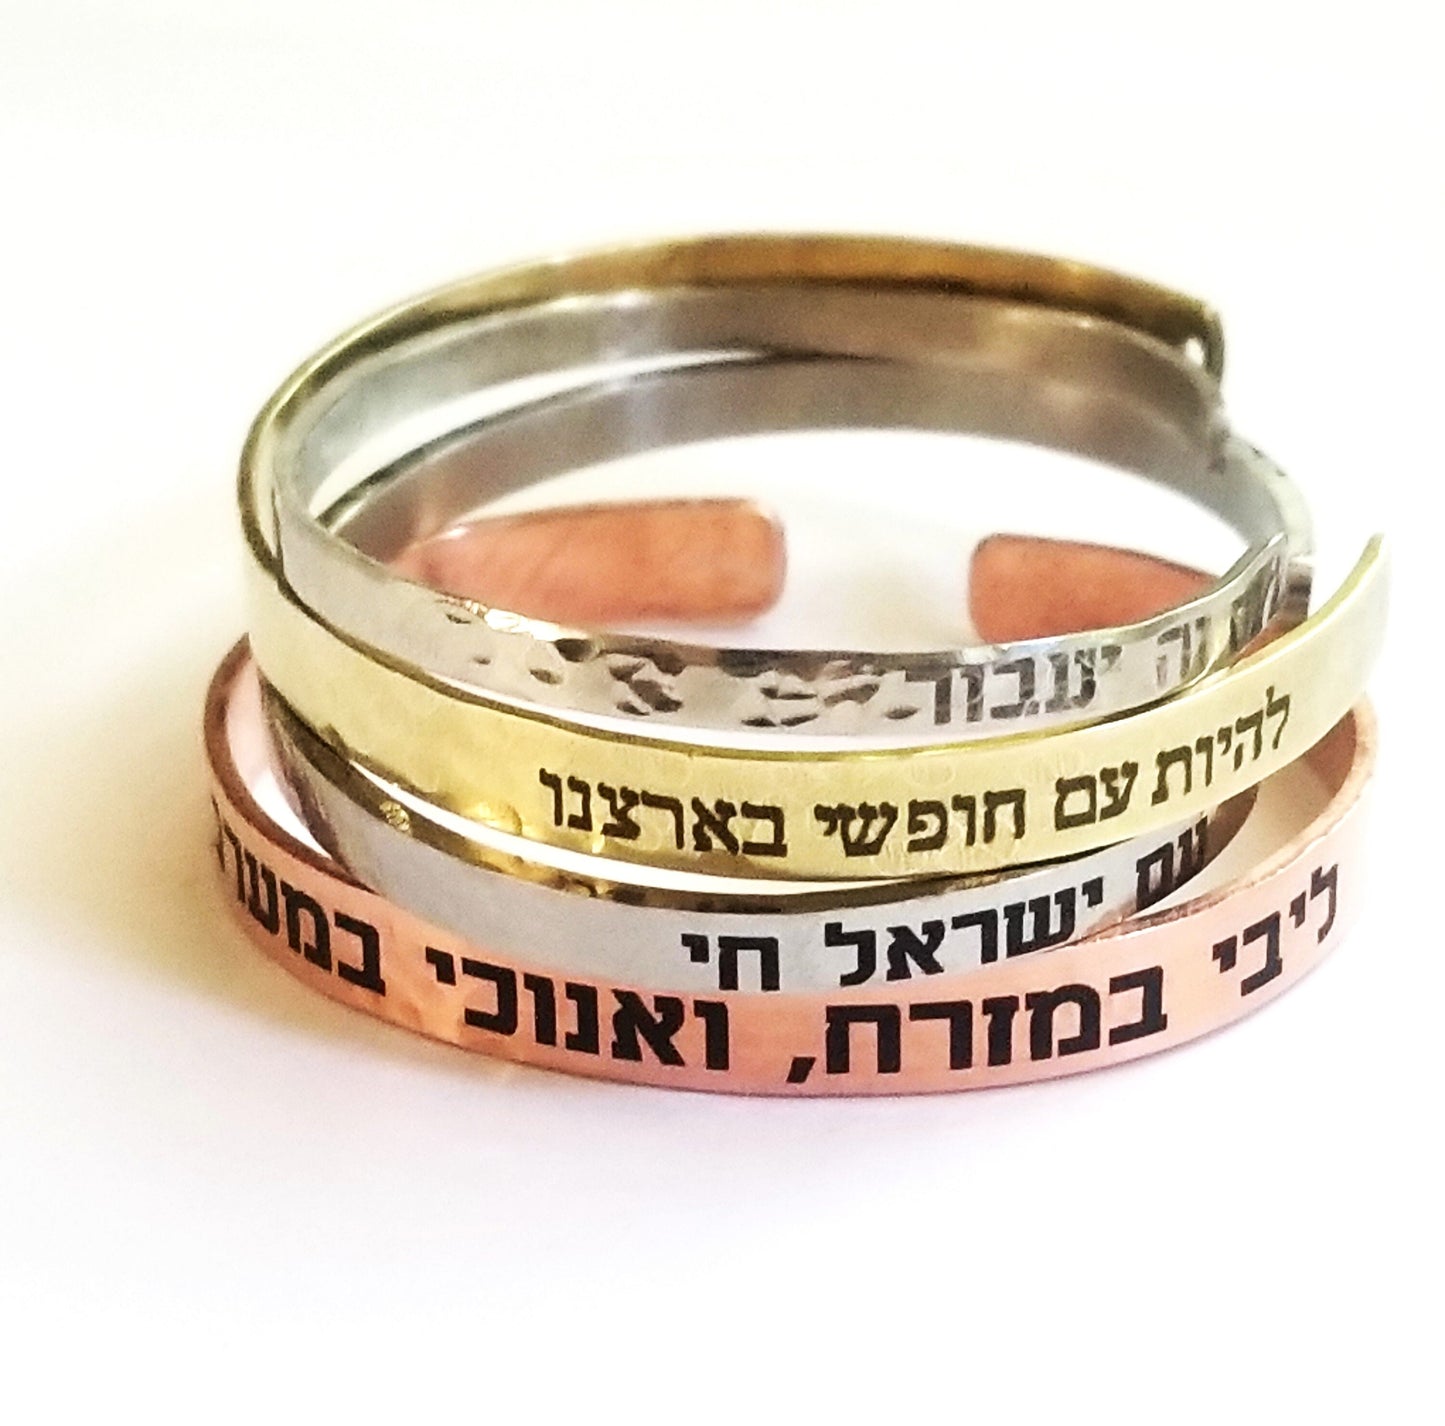 Hatikvah quote cuff, Hebrew bracelet, Engraved Brass bangle, Support Israel Jewelry, Am Israel Chai, Jewish pride, Custome Judaica Gift